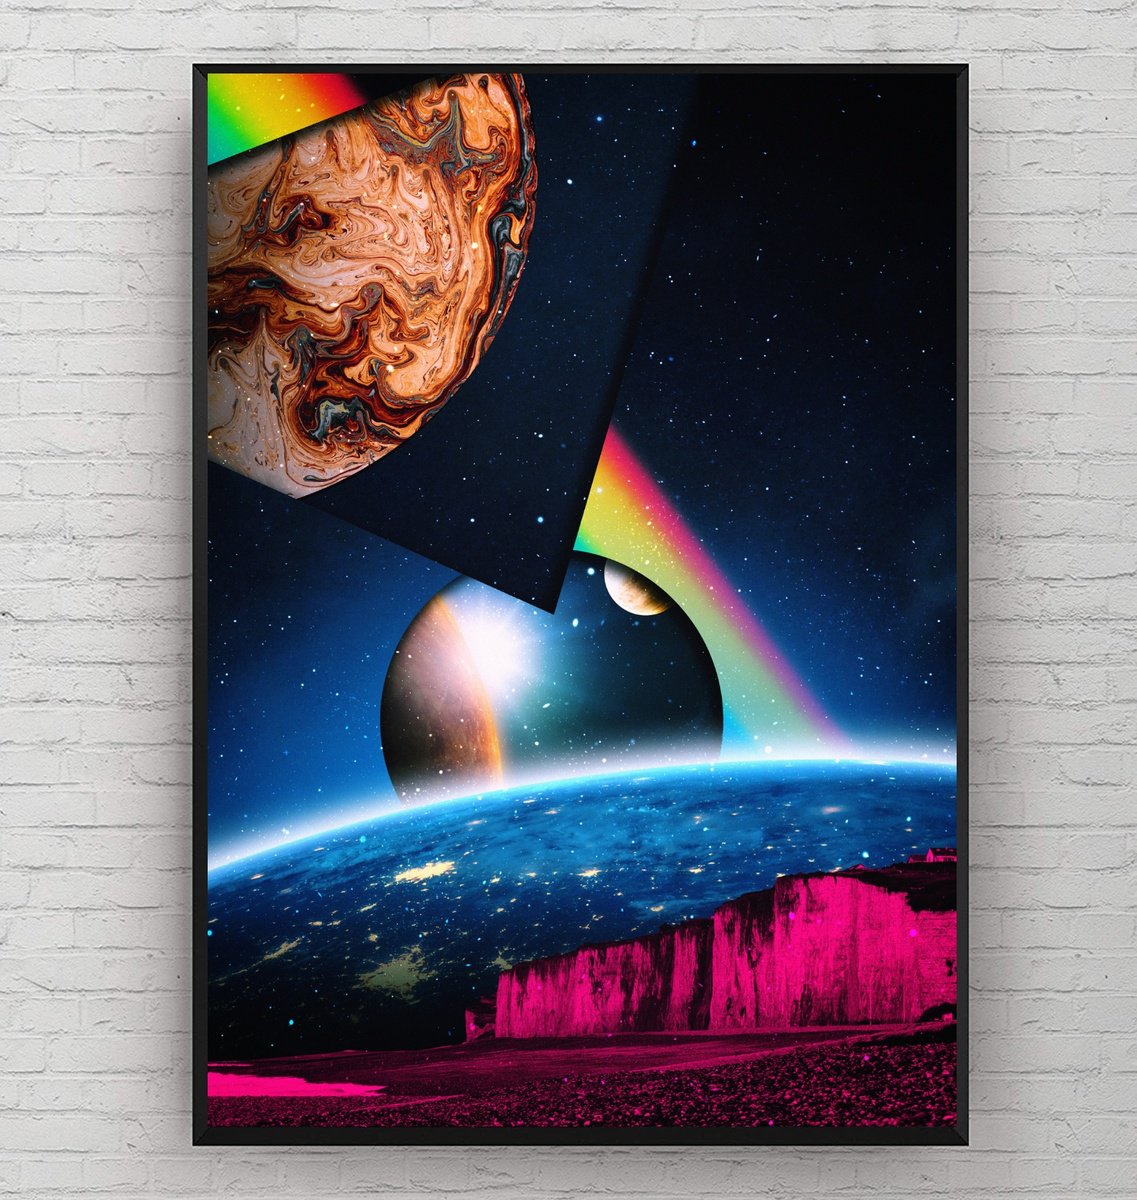 Symphony for a Dream - LIMITED EDITION 30 by Darius Comi